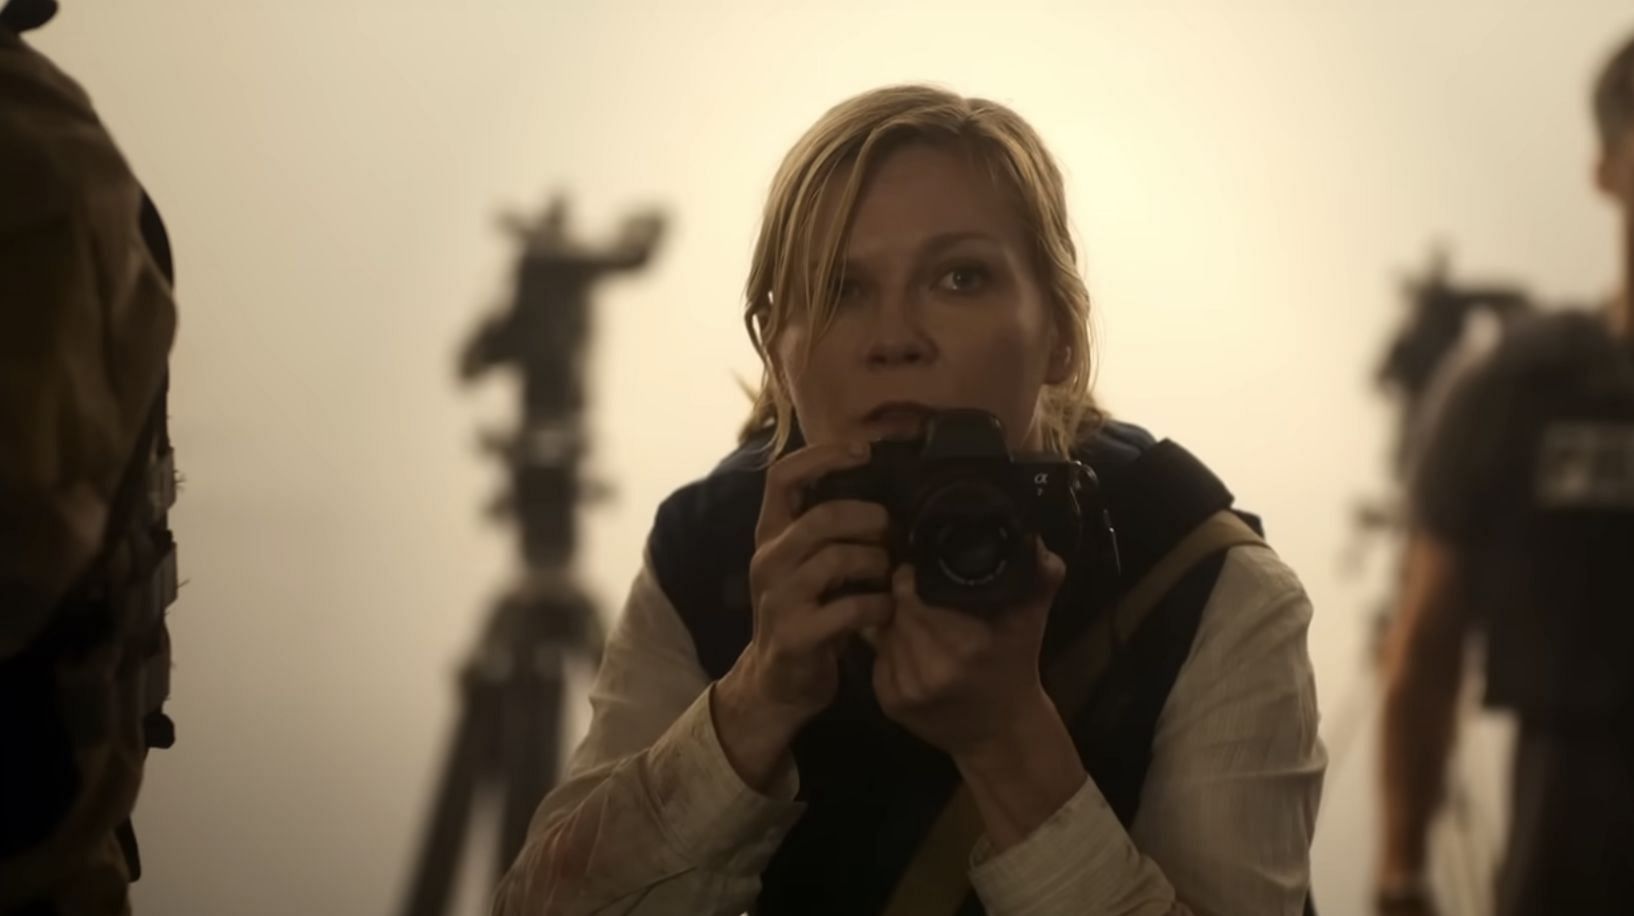 Kirsten Dunst as Lee Smith (Image via A24 Official Youtube)